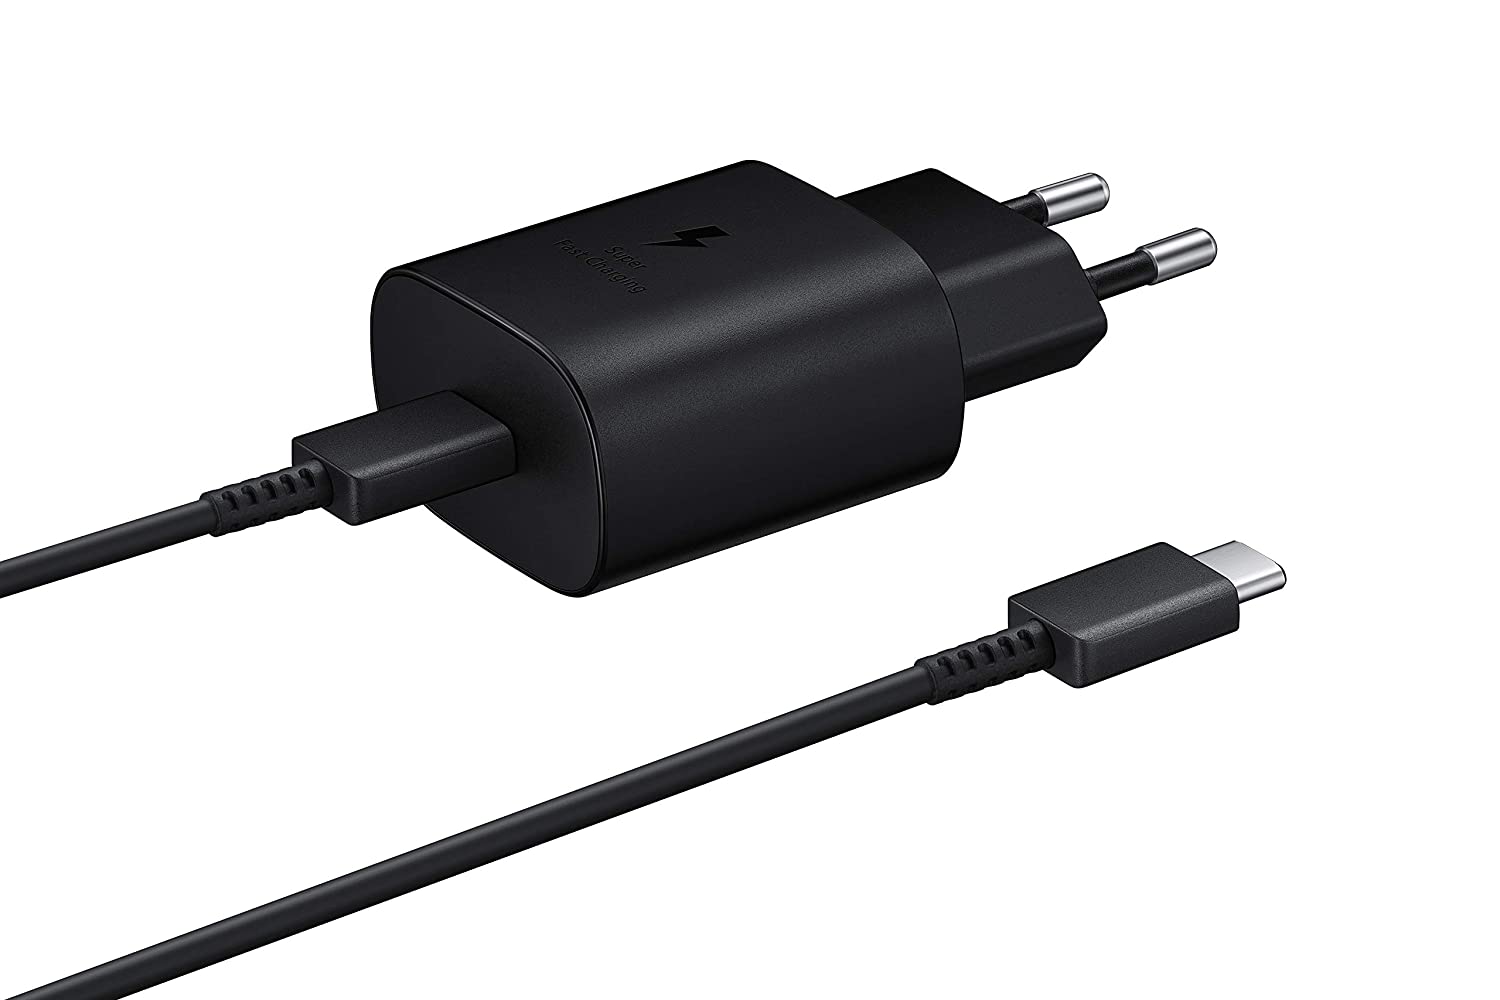 Samsung F23 5G 25W Super Fast Original USB-C PD Charger With C TO C Cable (Black)